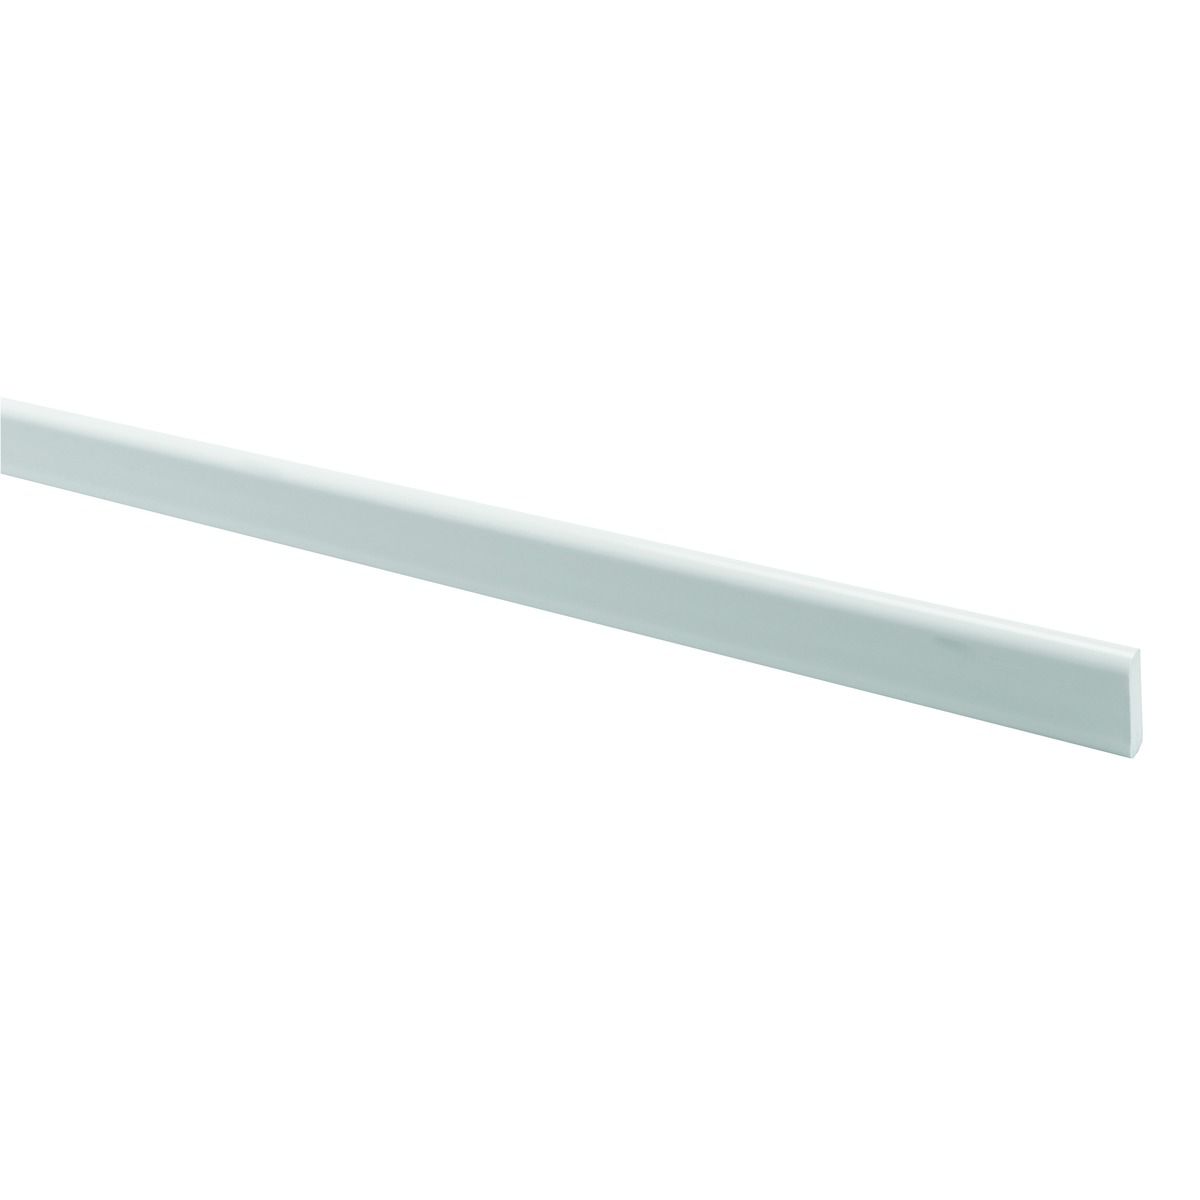 Image of Wickes PVCu White Cloaking Profile 30 x 2500mm